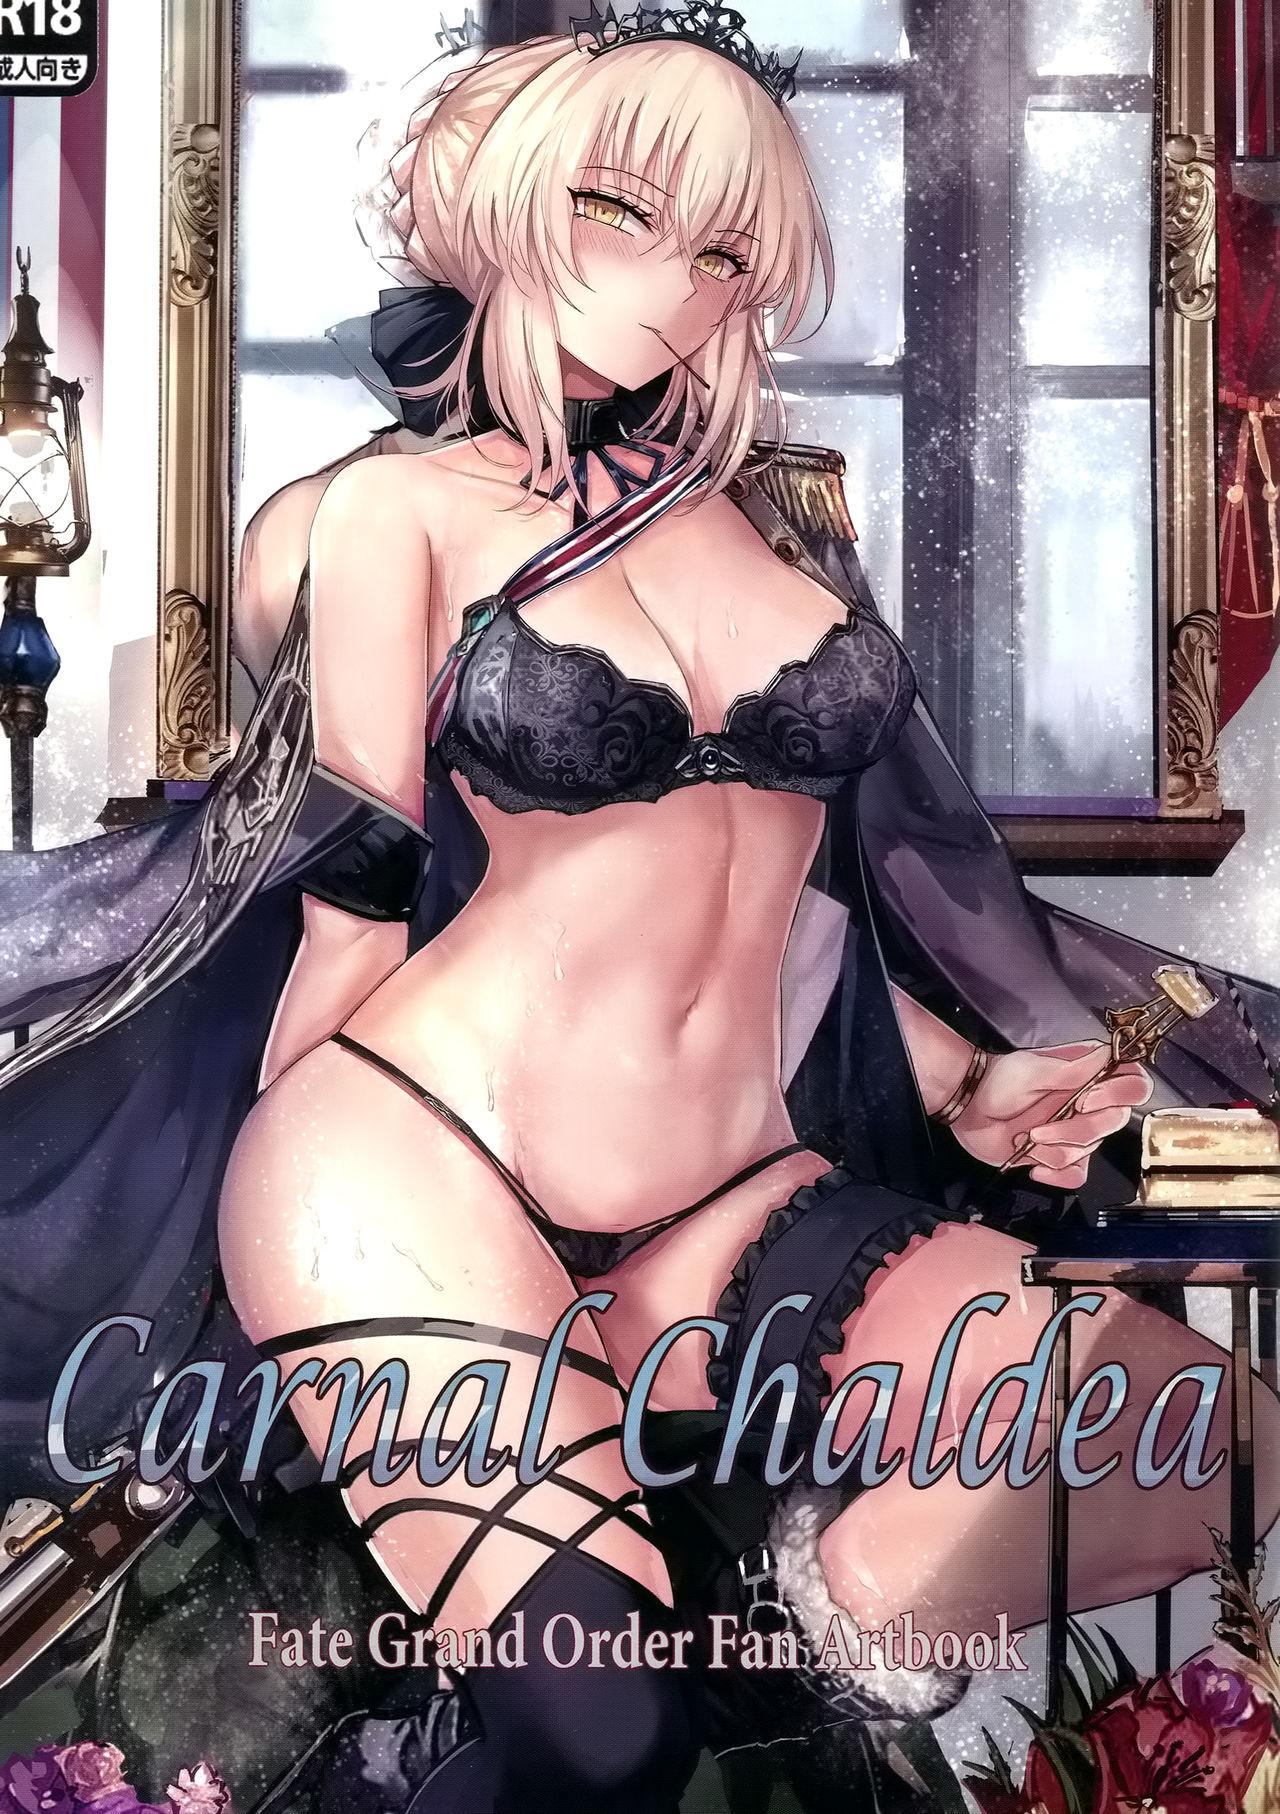 Ass Fetish Carnal Chaldea - Fate grand order Teen Hardcore - Picture 1